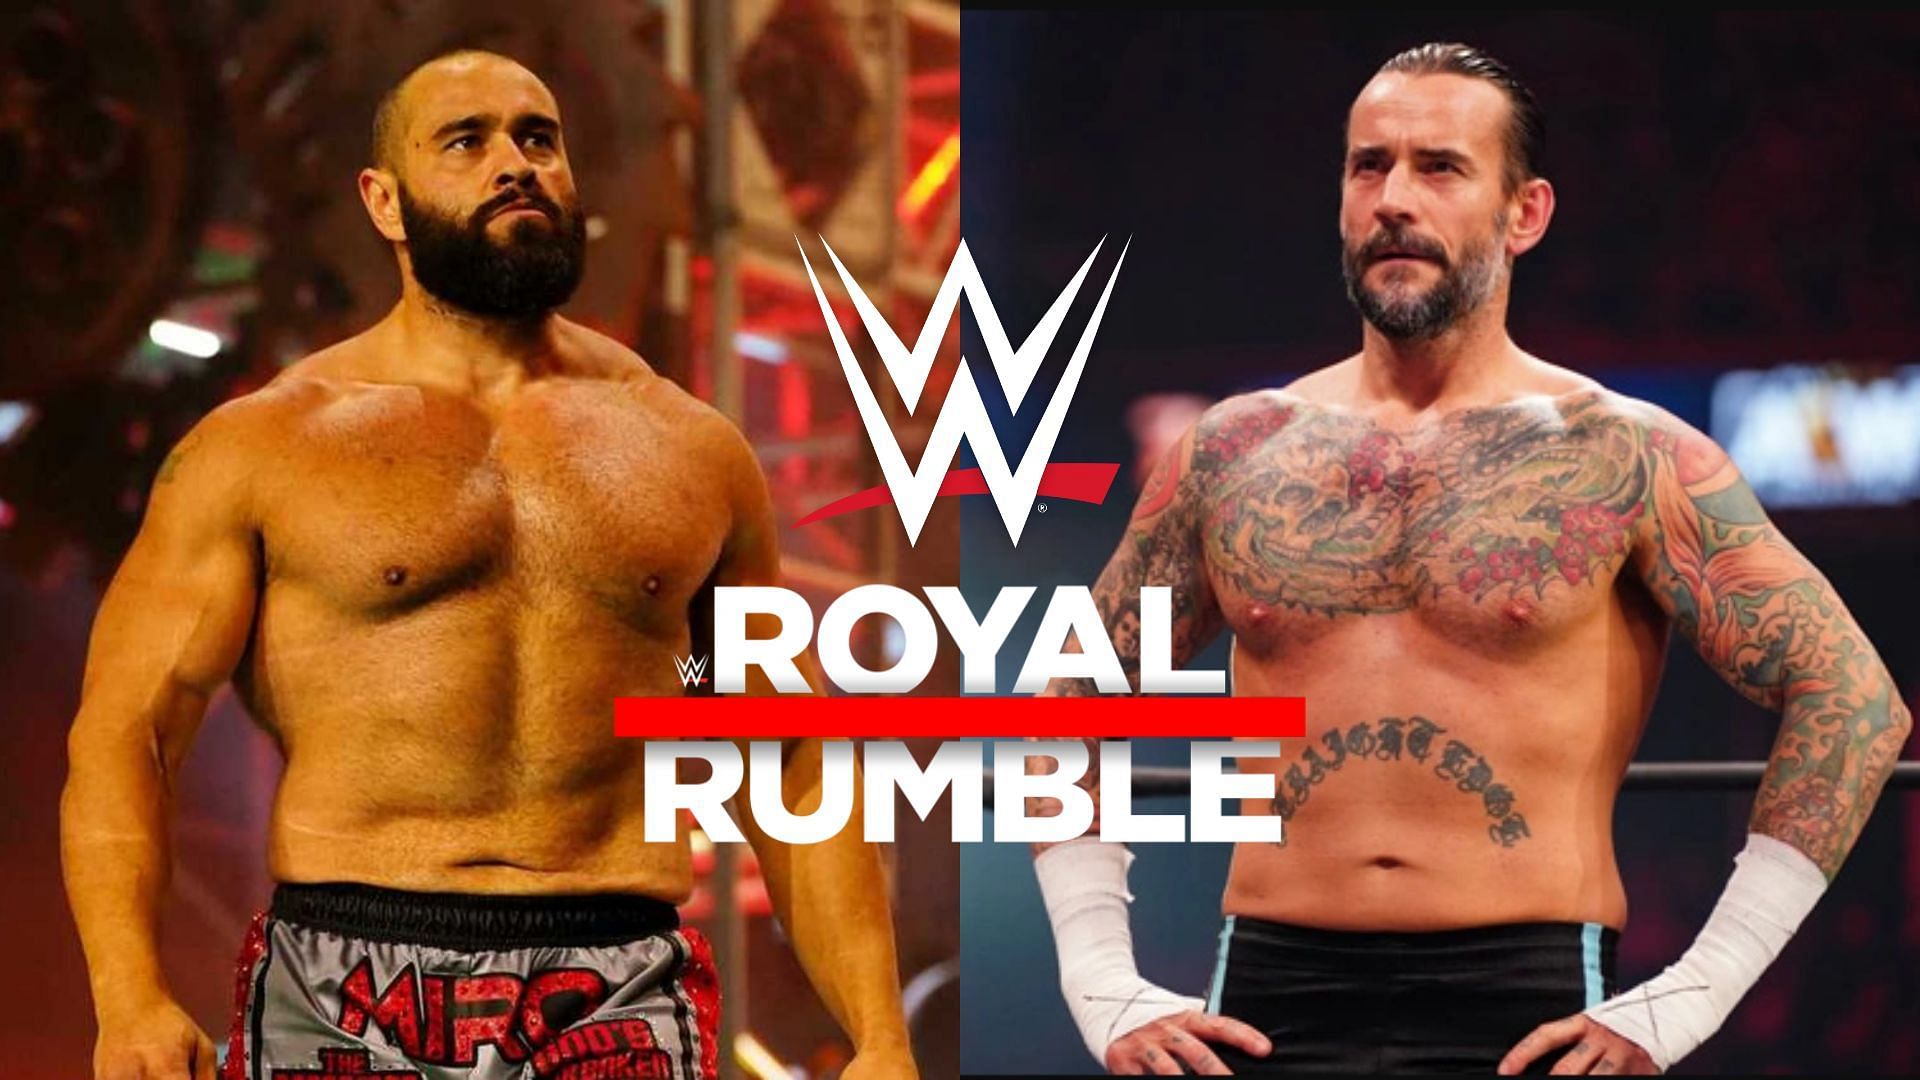 Which AEW stars could realistically pop up at the WWE Royal Rumble next month?